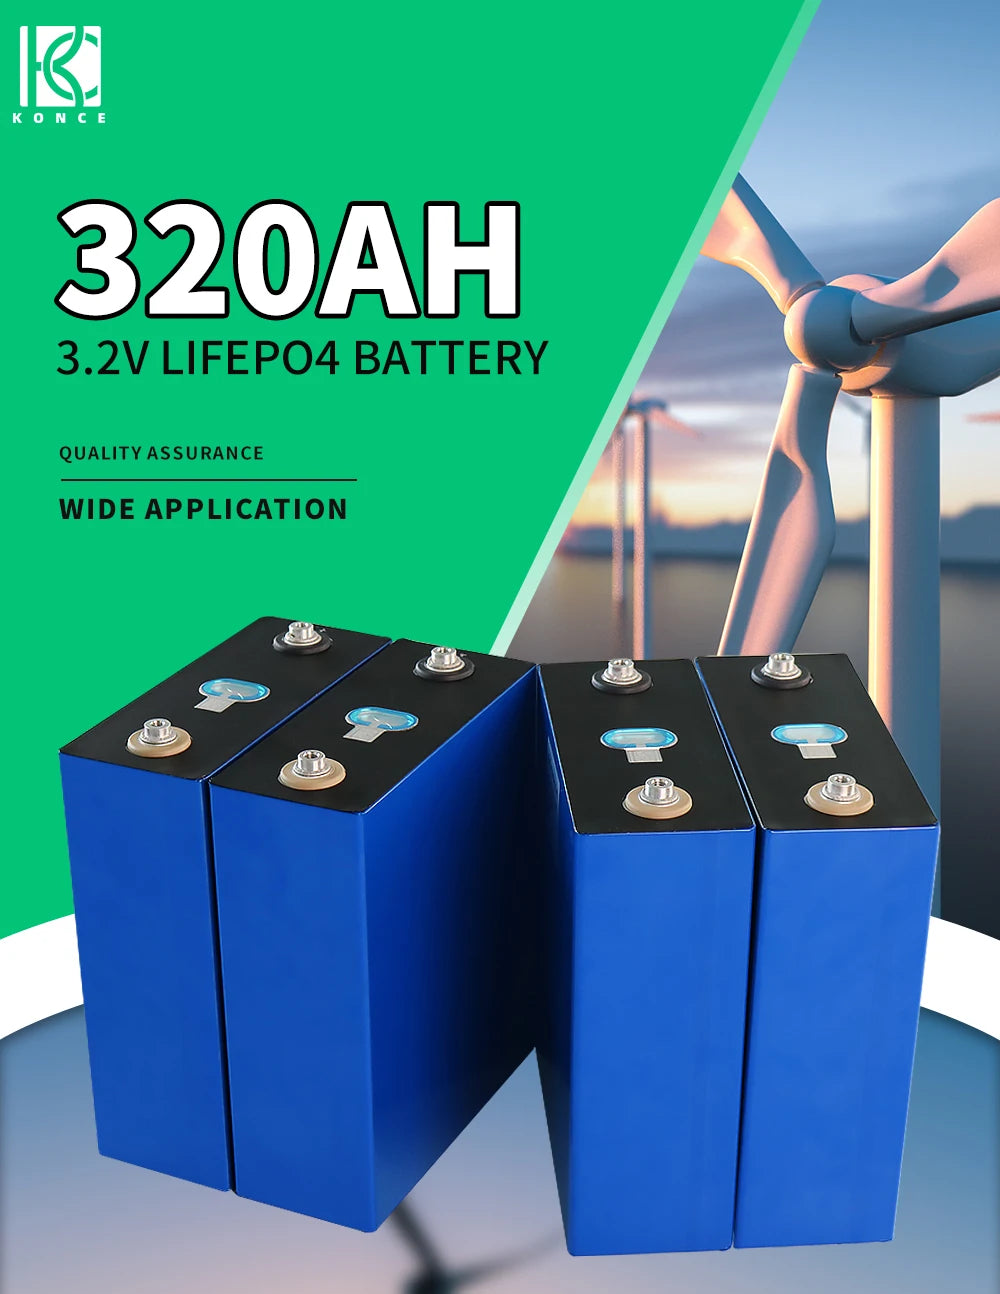 320AH Lifepo4 Battery, High-performance battery pack for electric vehicles, homes, boats, and wheelchairs.